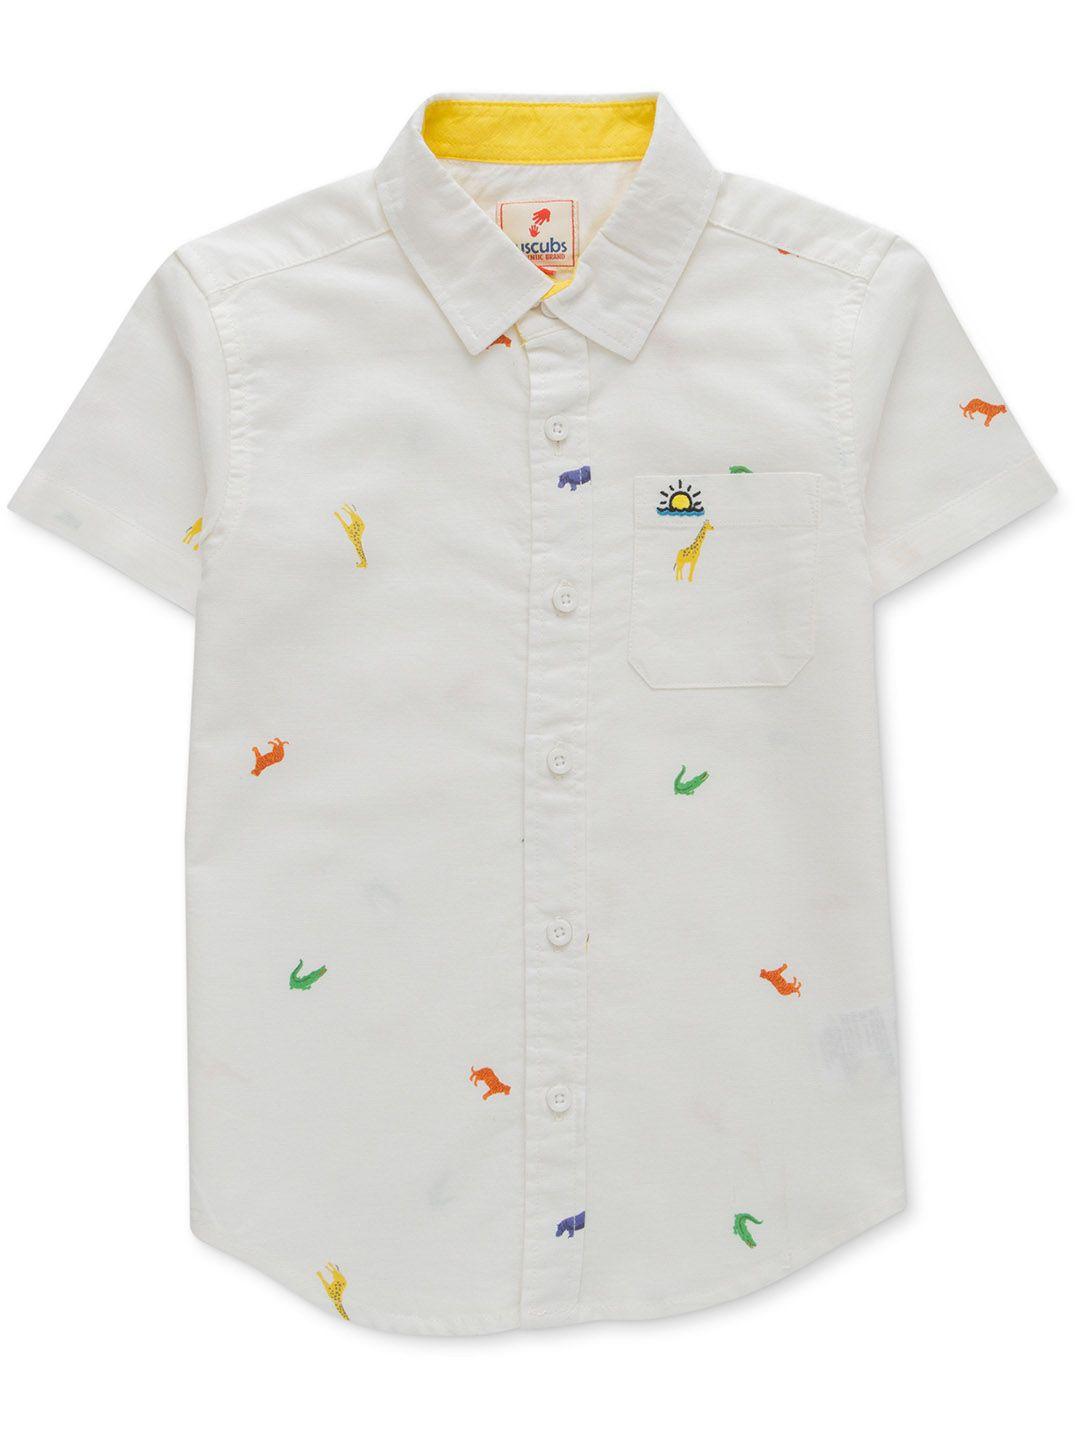 juscubs boys off white premium opaque printed casual shirt